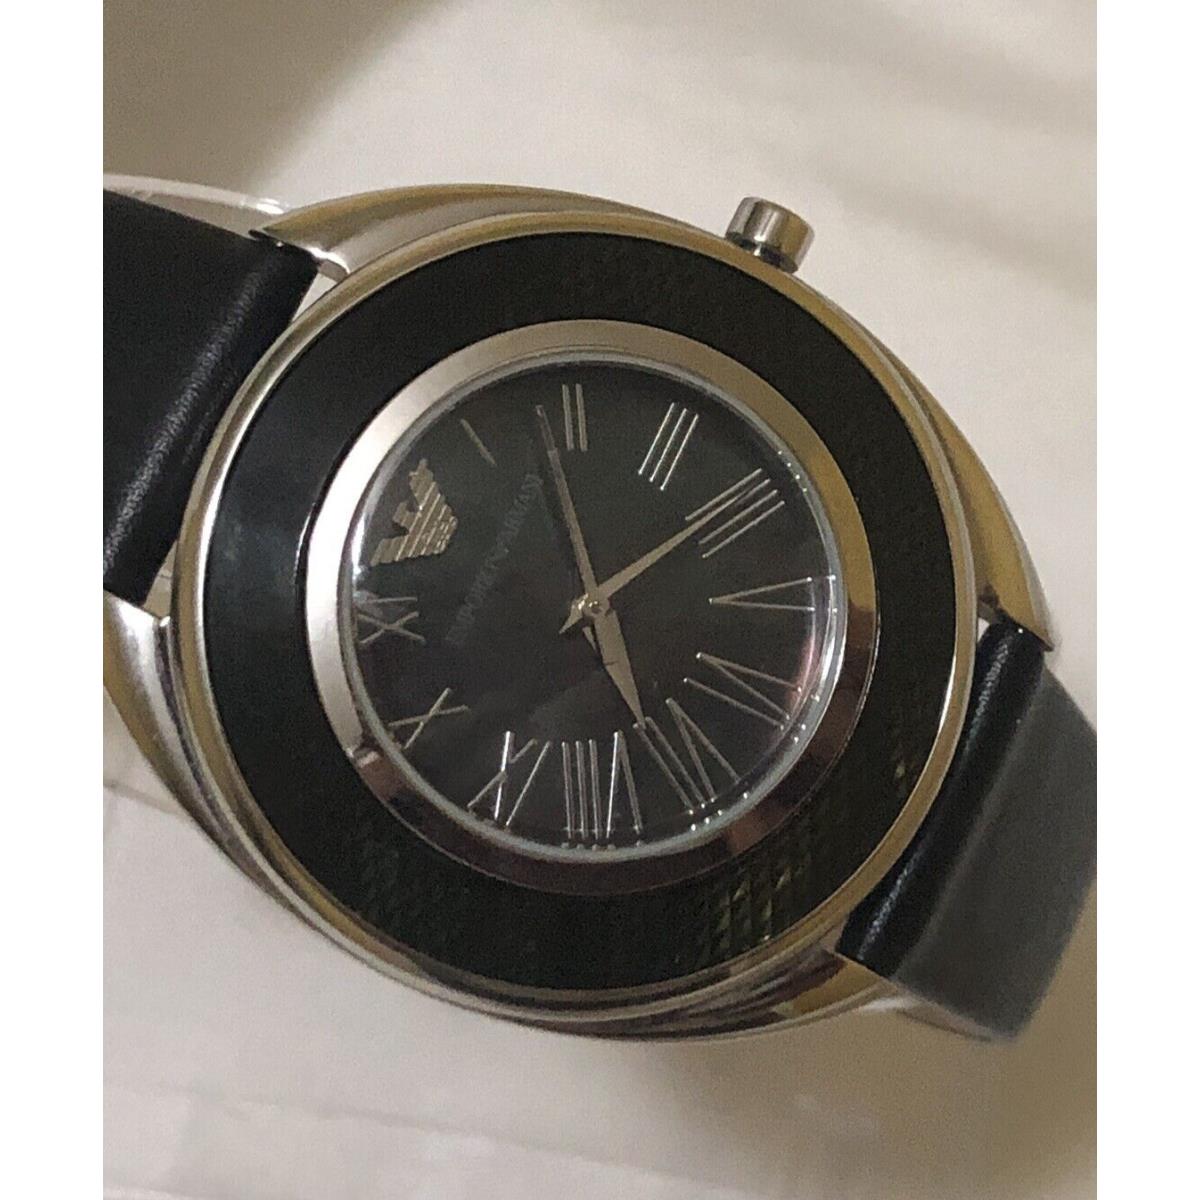 Emporio Armani watch Lily - Black, mother of pearl Dial, Black Band, Silver Bezel 7